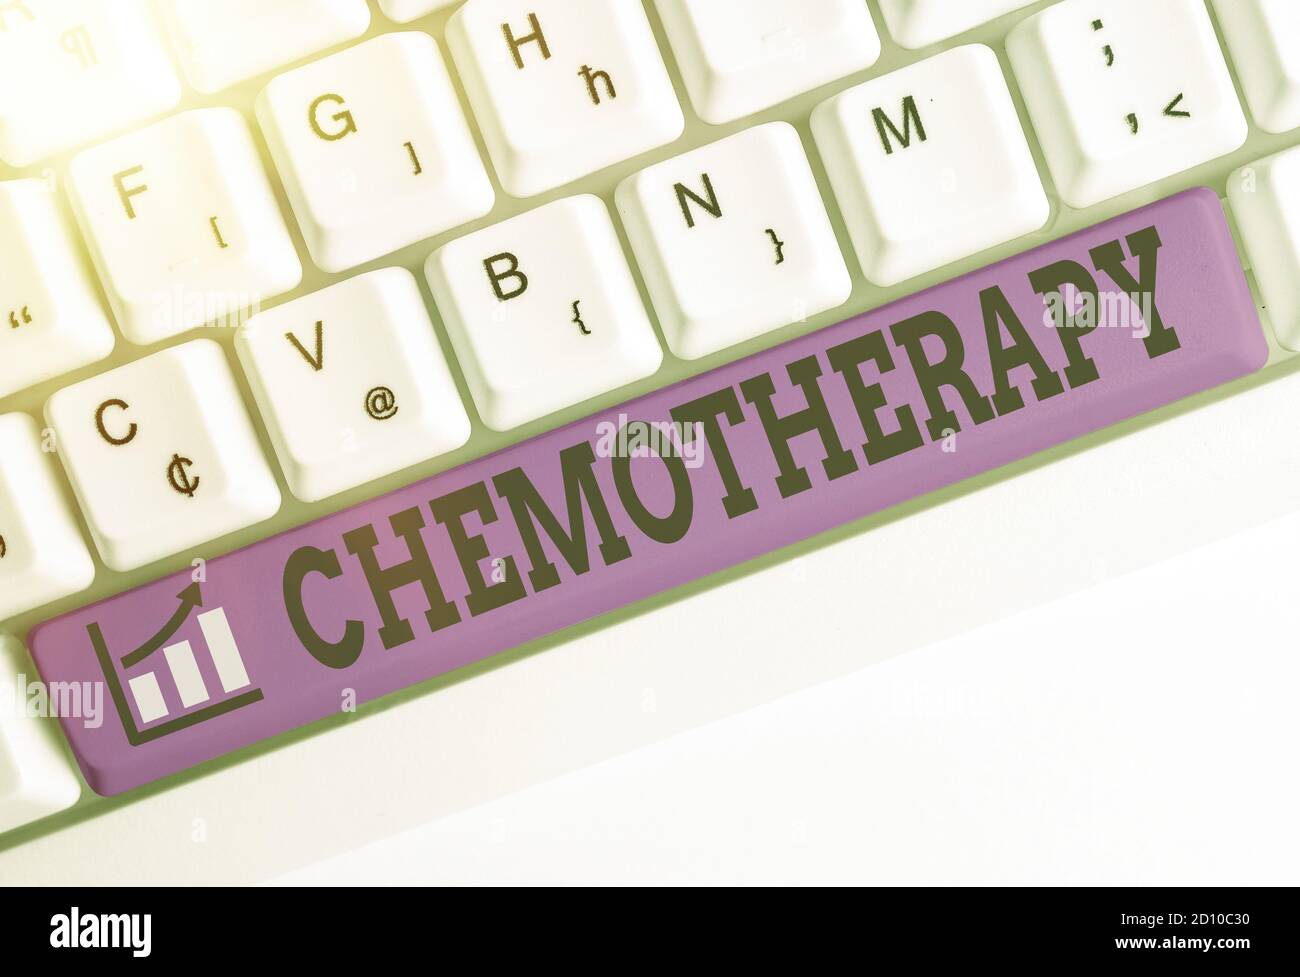 Conceptual hand writing showing Chemotherapy. Concept meaning treatment of disease used chemical substances for cancer Colored keyboard key with acces Stock Photo